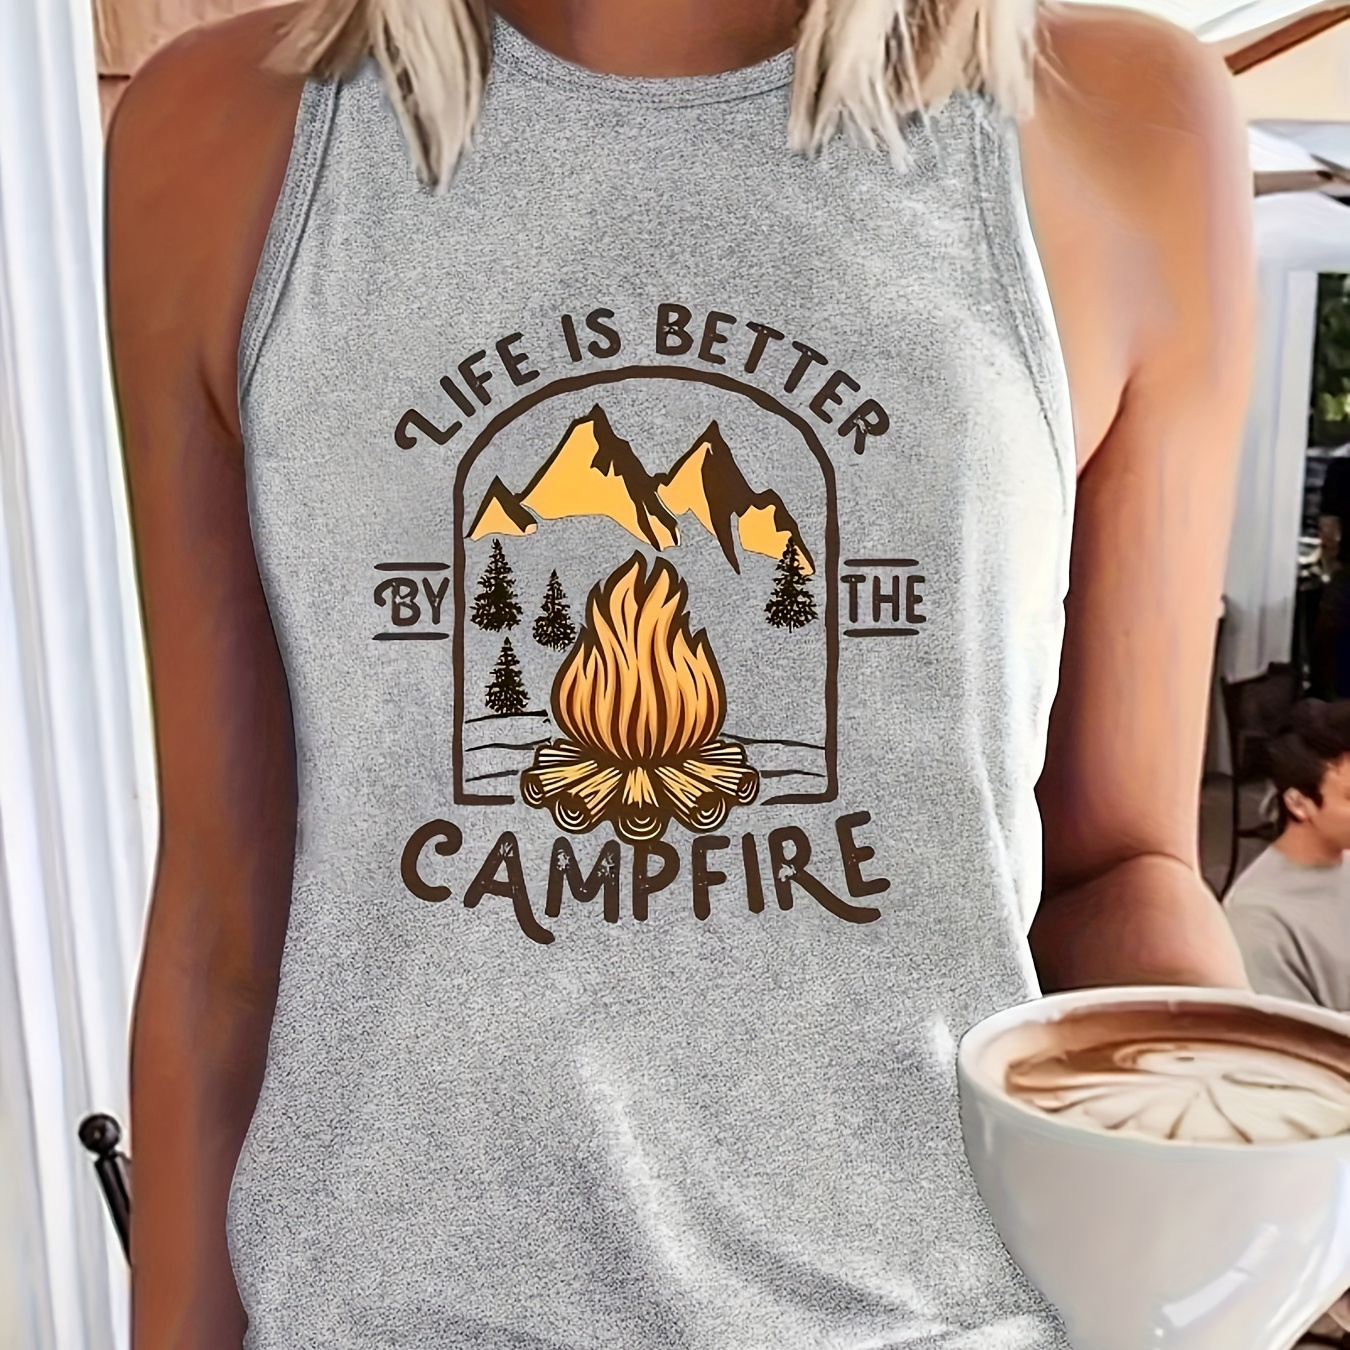 

Camp Fire Print Sport Fitness Vest Top, Casual Sleeveless Vest Top, Women's Clothing